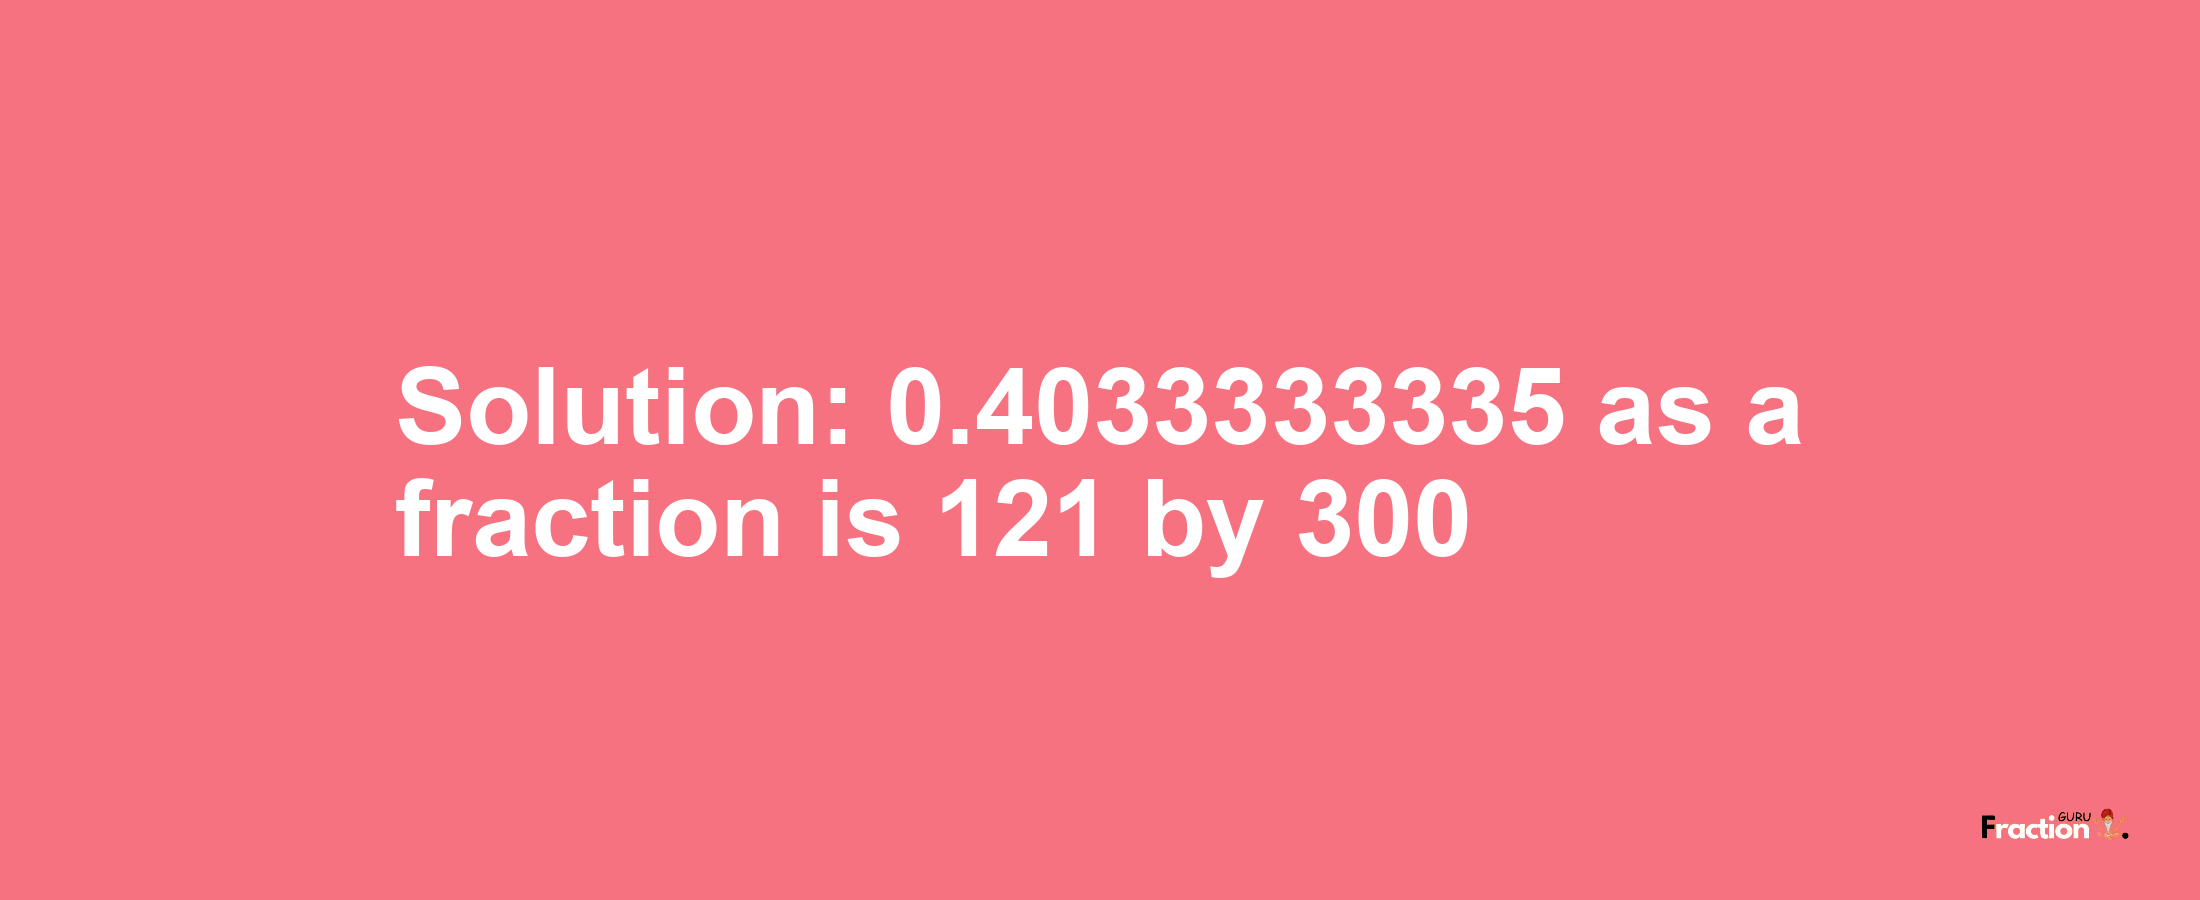 Solution:0.4033333335 as a fraction is 121/300